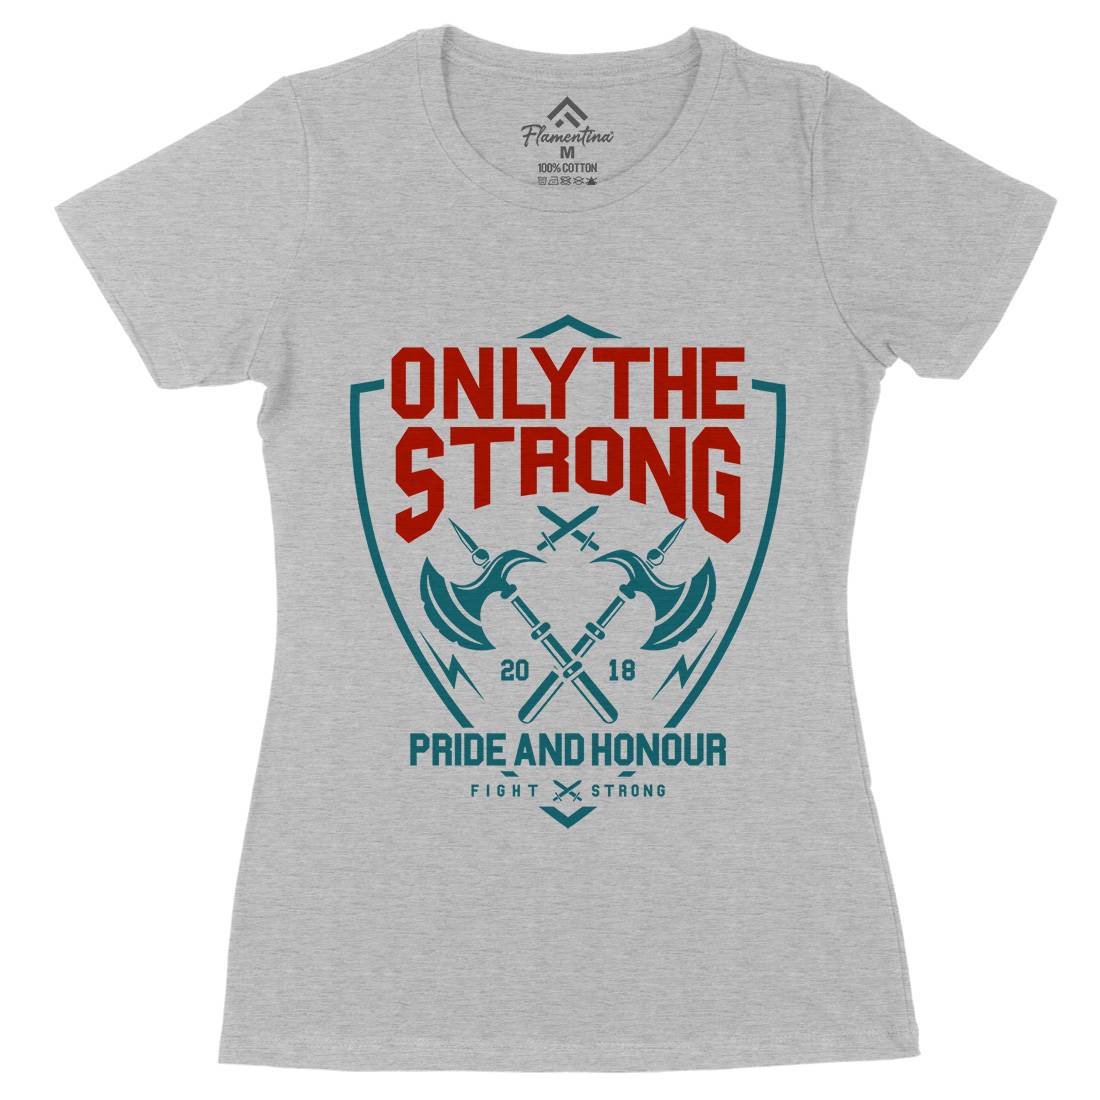 Only The Strong Womens Organic Crew Neck T-Shirt Quotes A257